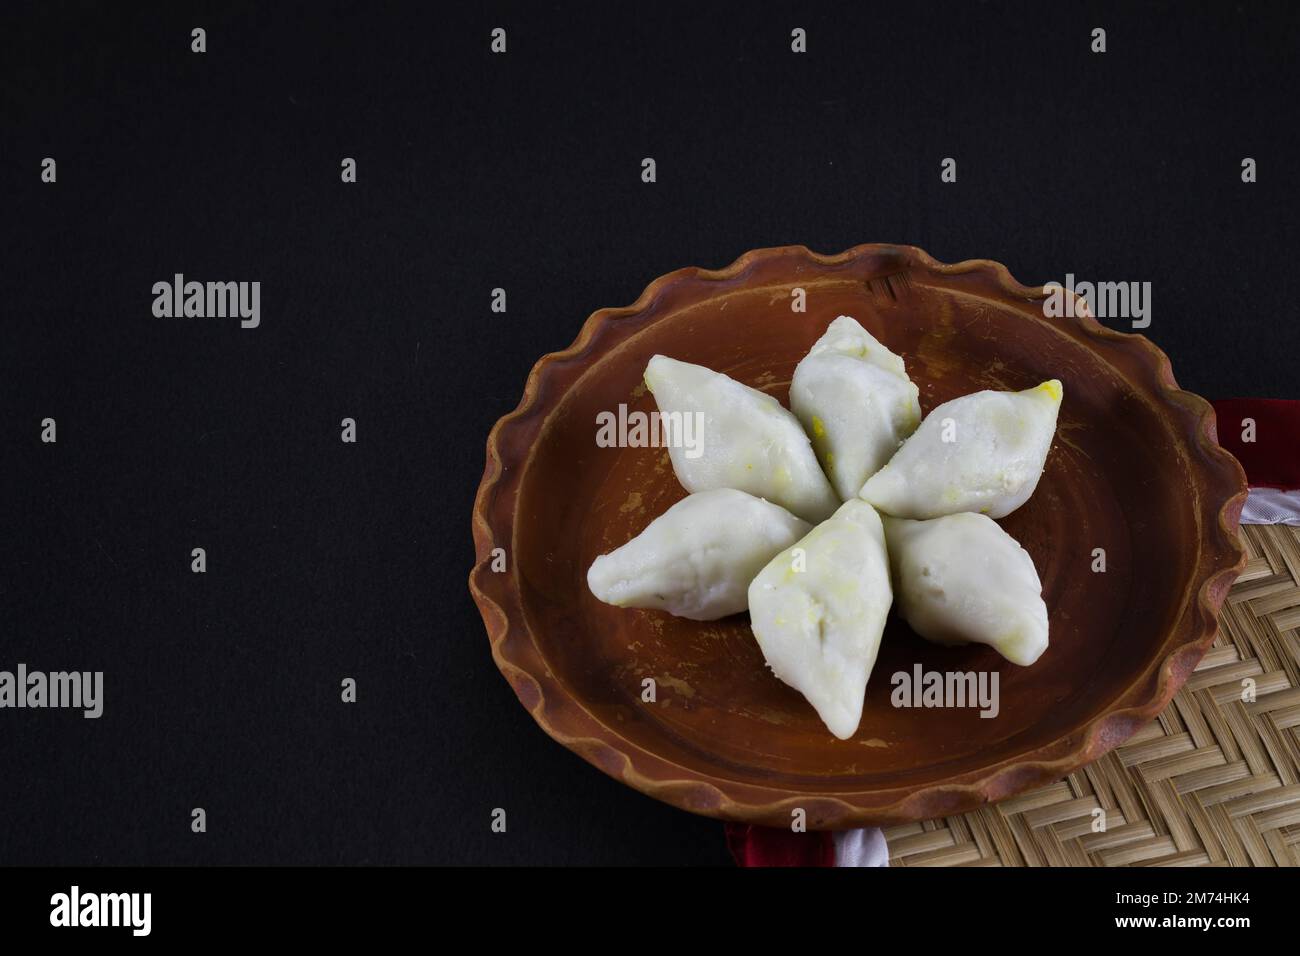 makar sangkranti or poush sangkranti celebration with puli pithe or bengali rice flour dumplings with coconut fillings served on a clay plate with jag Stock Photo